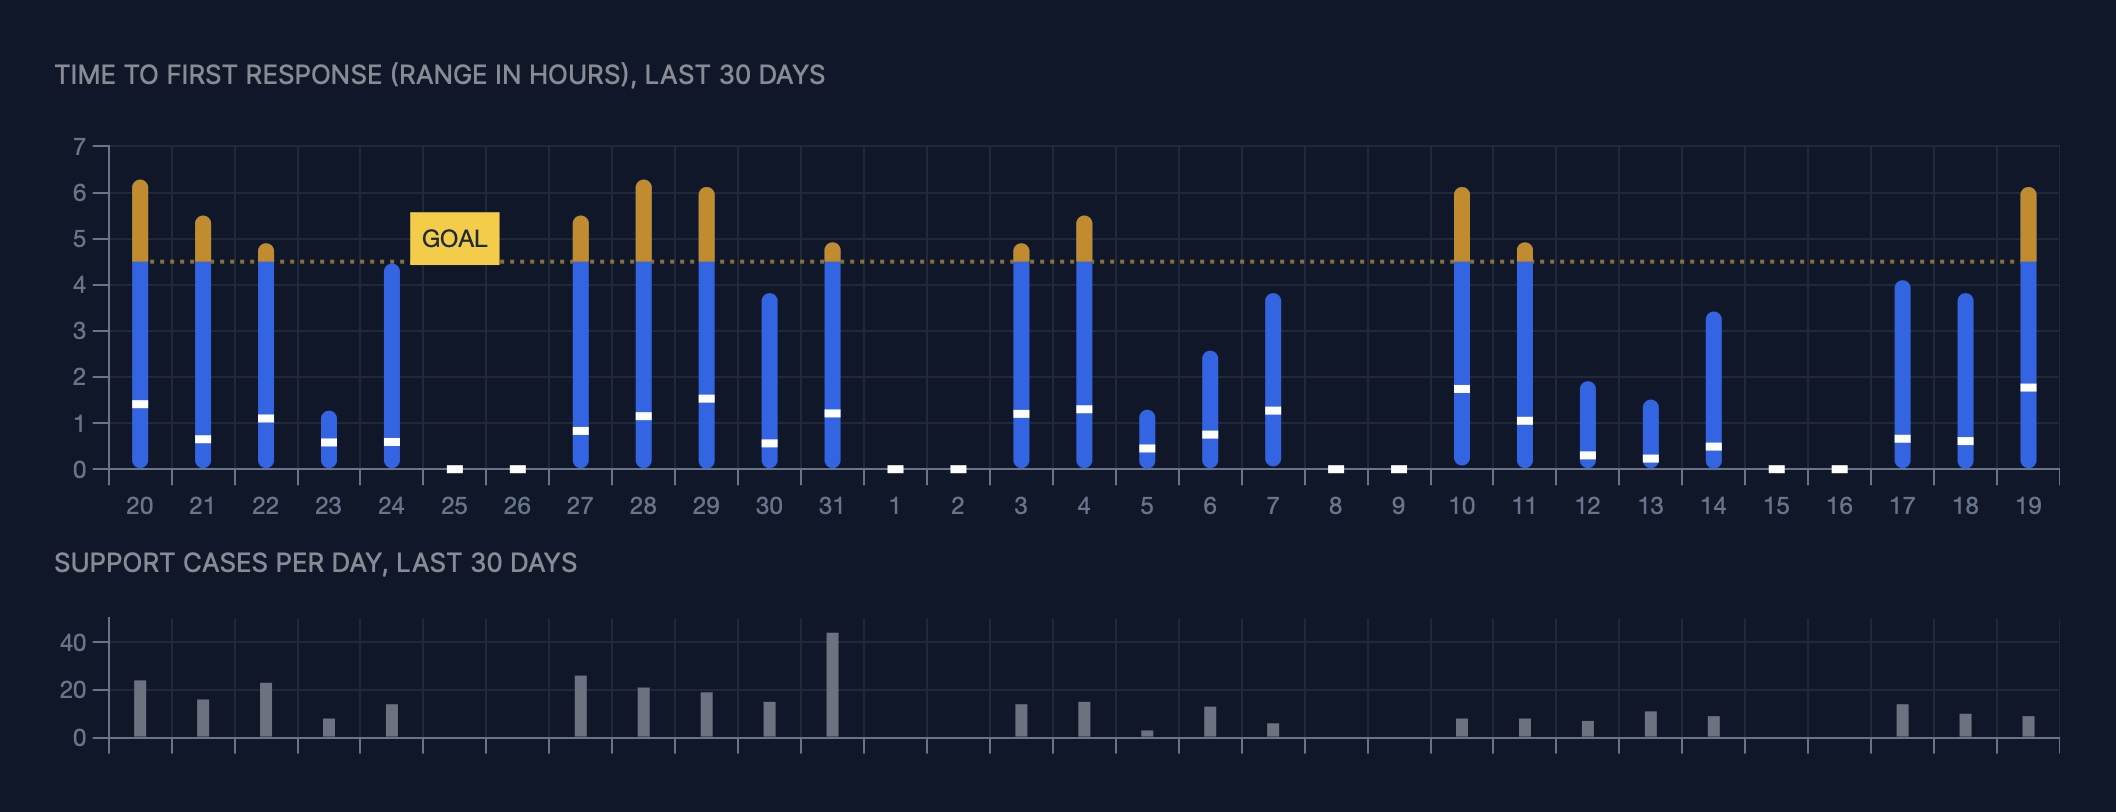 Screenshot of a chart showing time to first response trends for a support help line team. The chart is split, and below is a sub-chart showing daily support case volume.